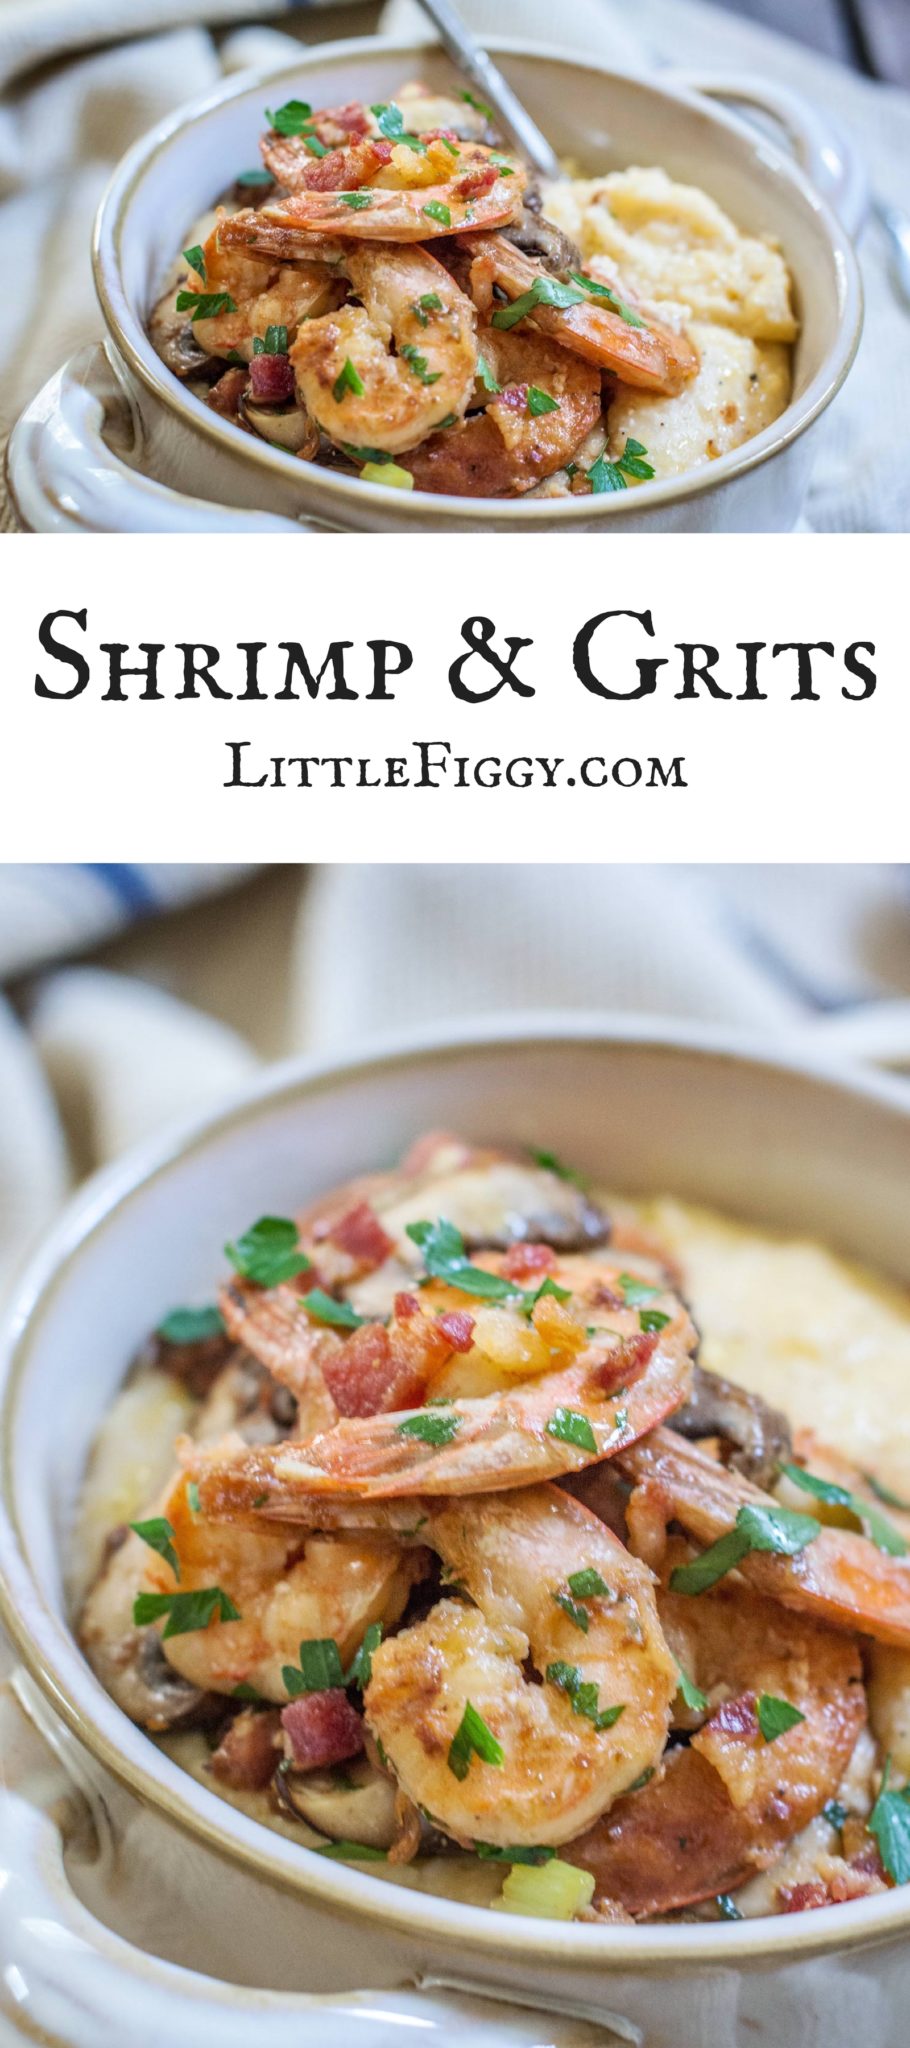 This the quintessential southern recipe for Shrimp and Grits! Find the recipe at Little Figgy Food and enjoy!